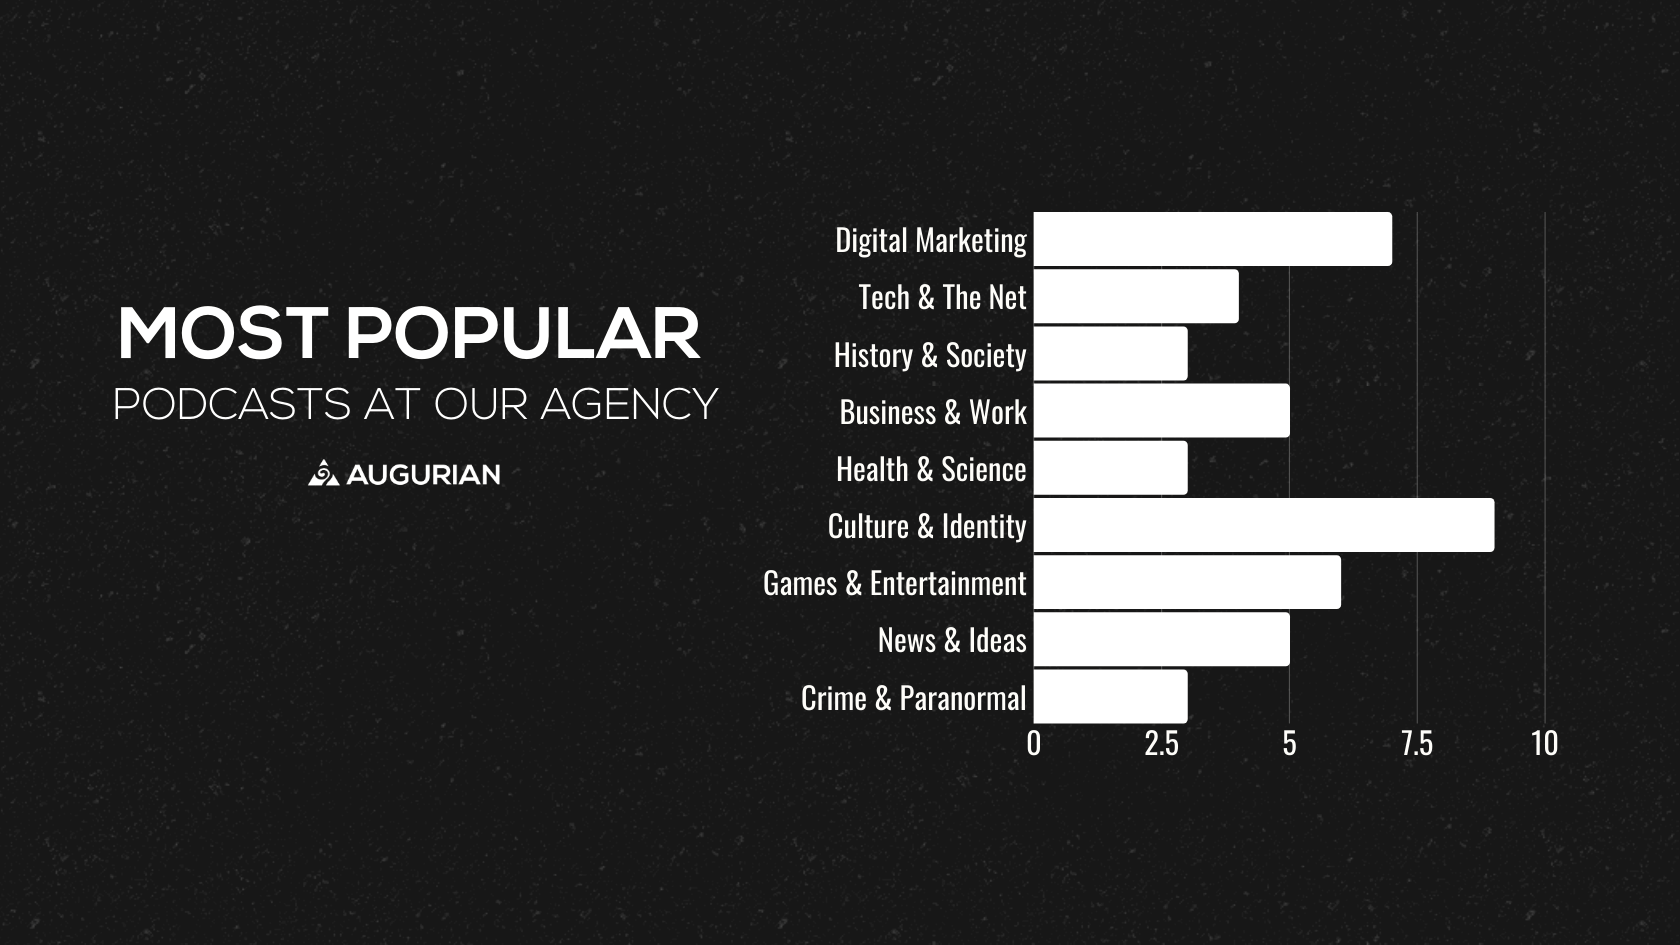 Bar Graph of Our Agency's Most Popular Types of Podcasts